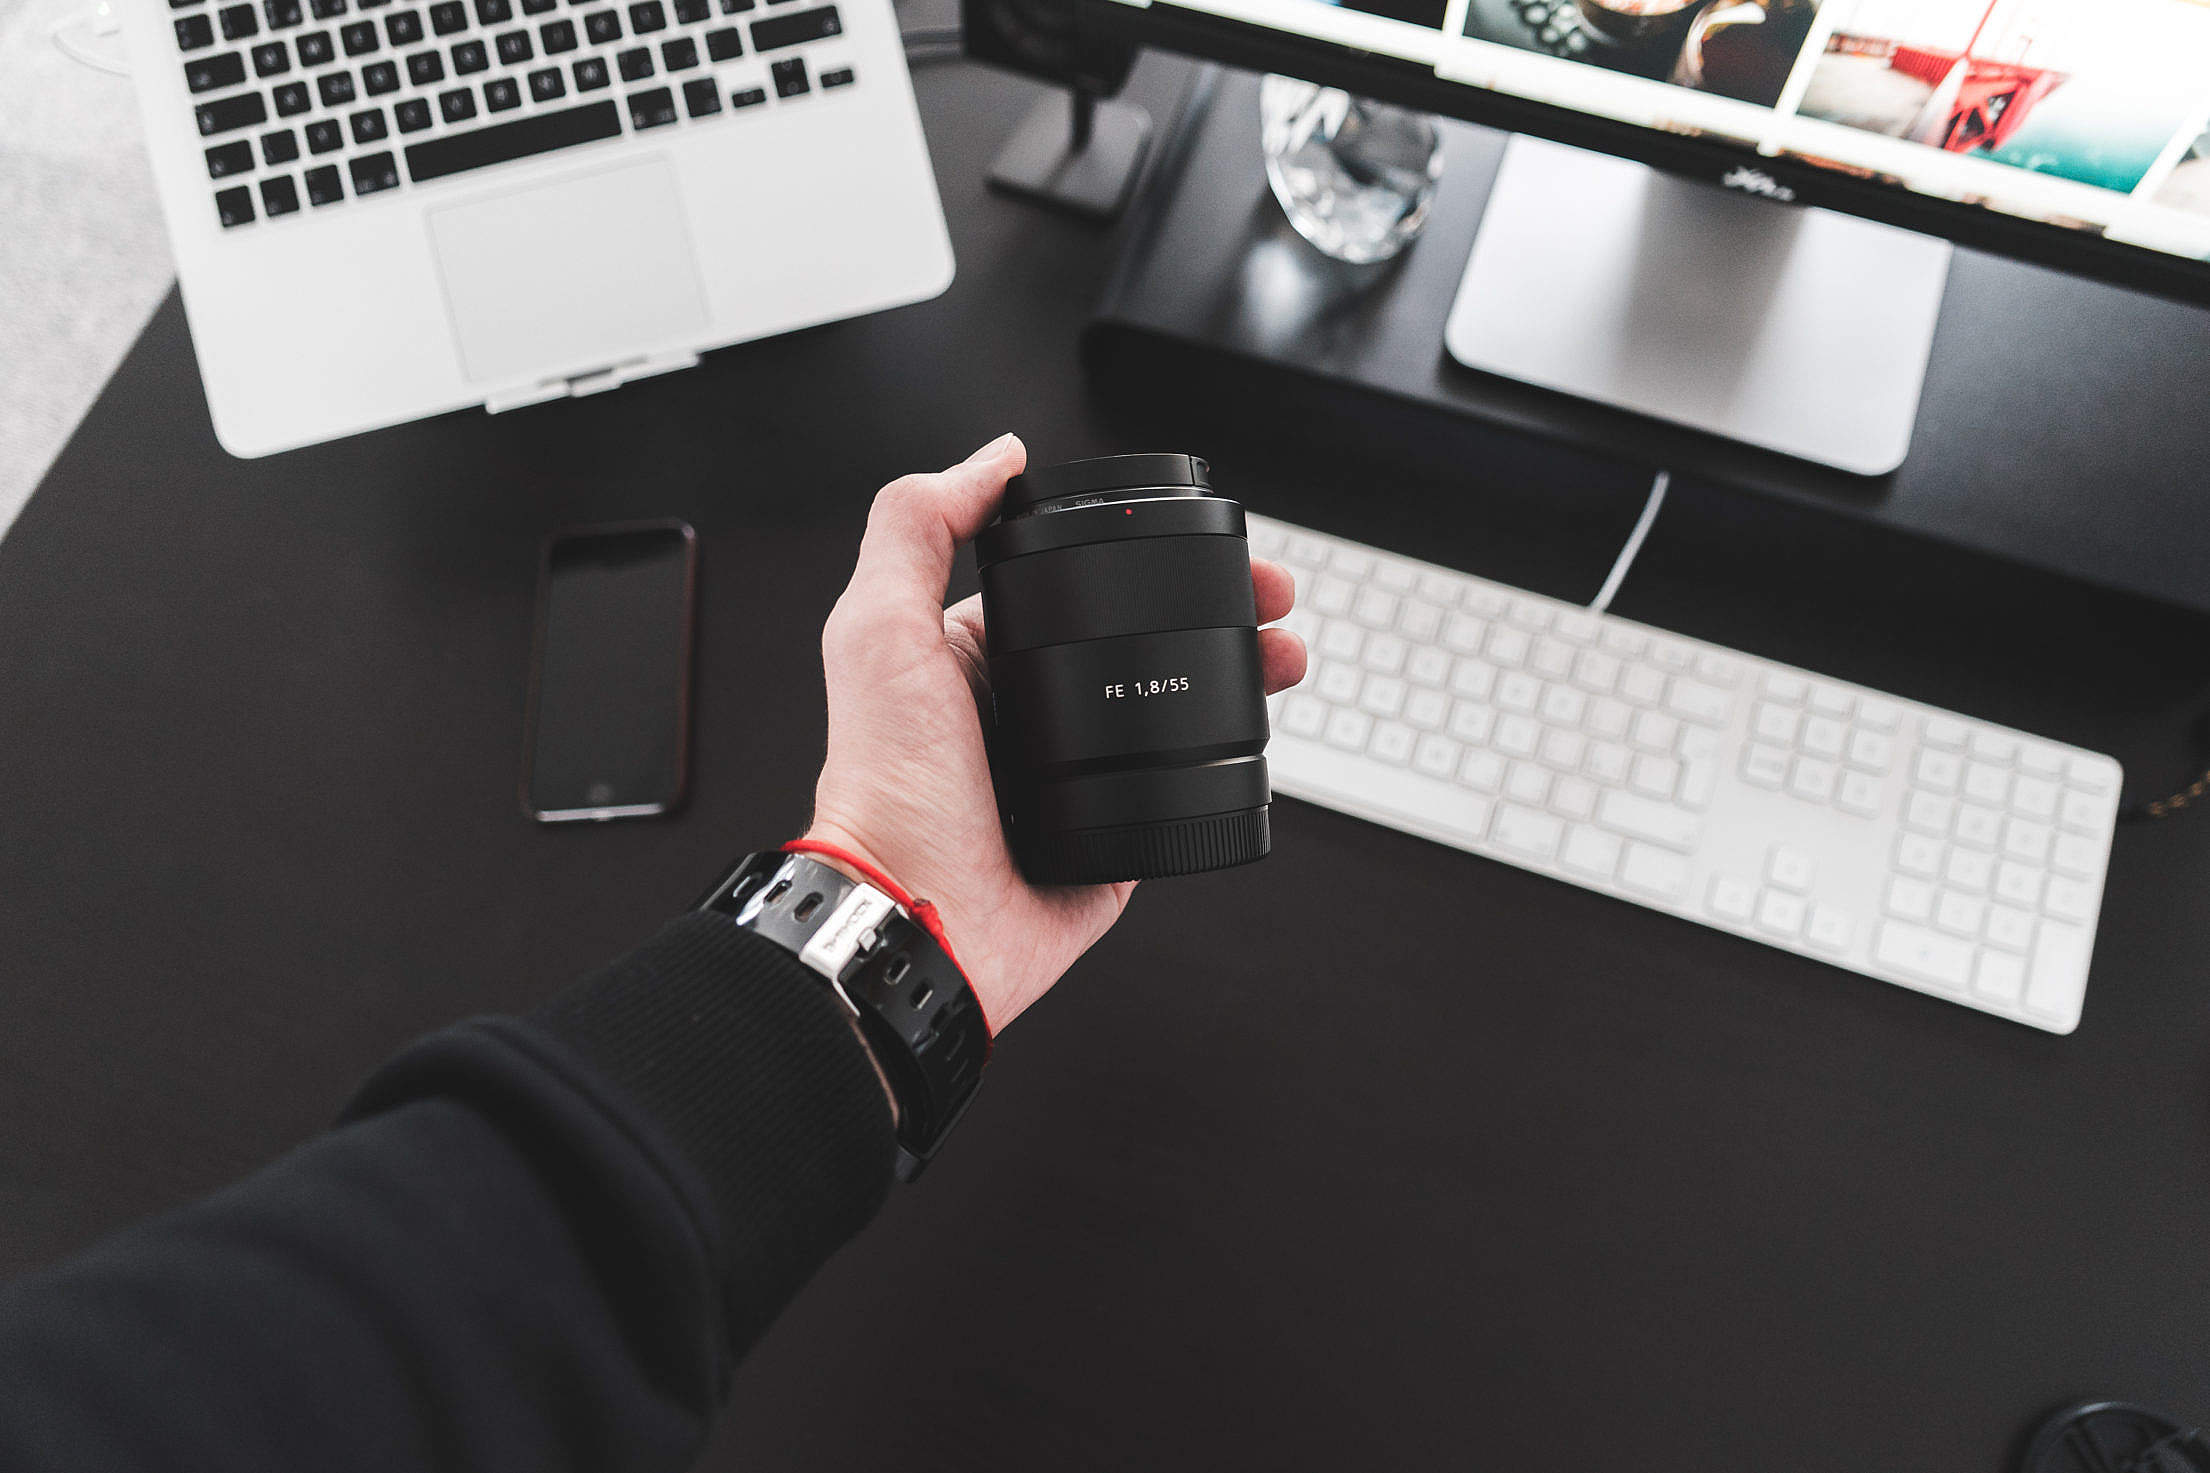 Holding Sony Zeiss Sonnar FE 55mm f/1.8 Lens in Hand #2 Free Stock Photo